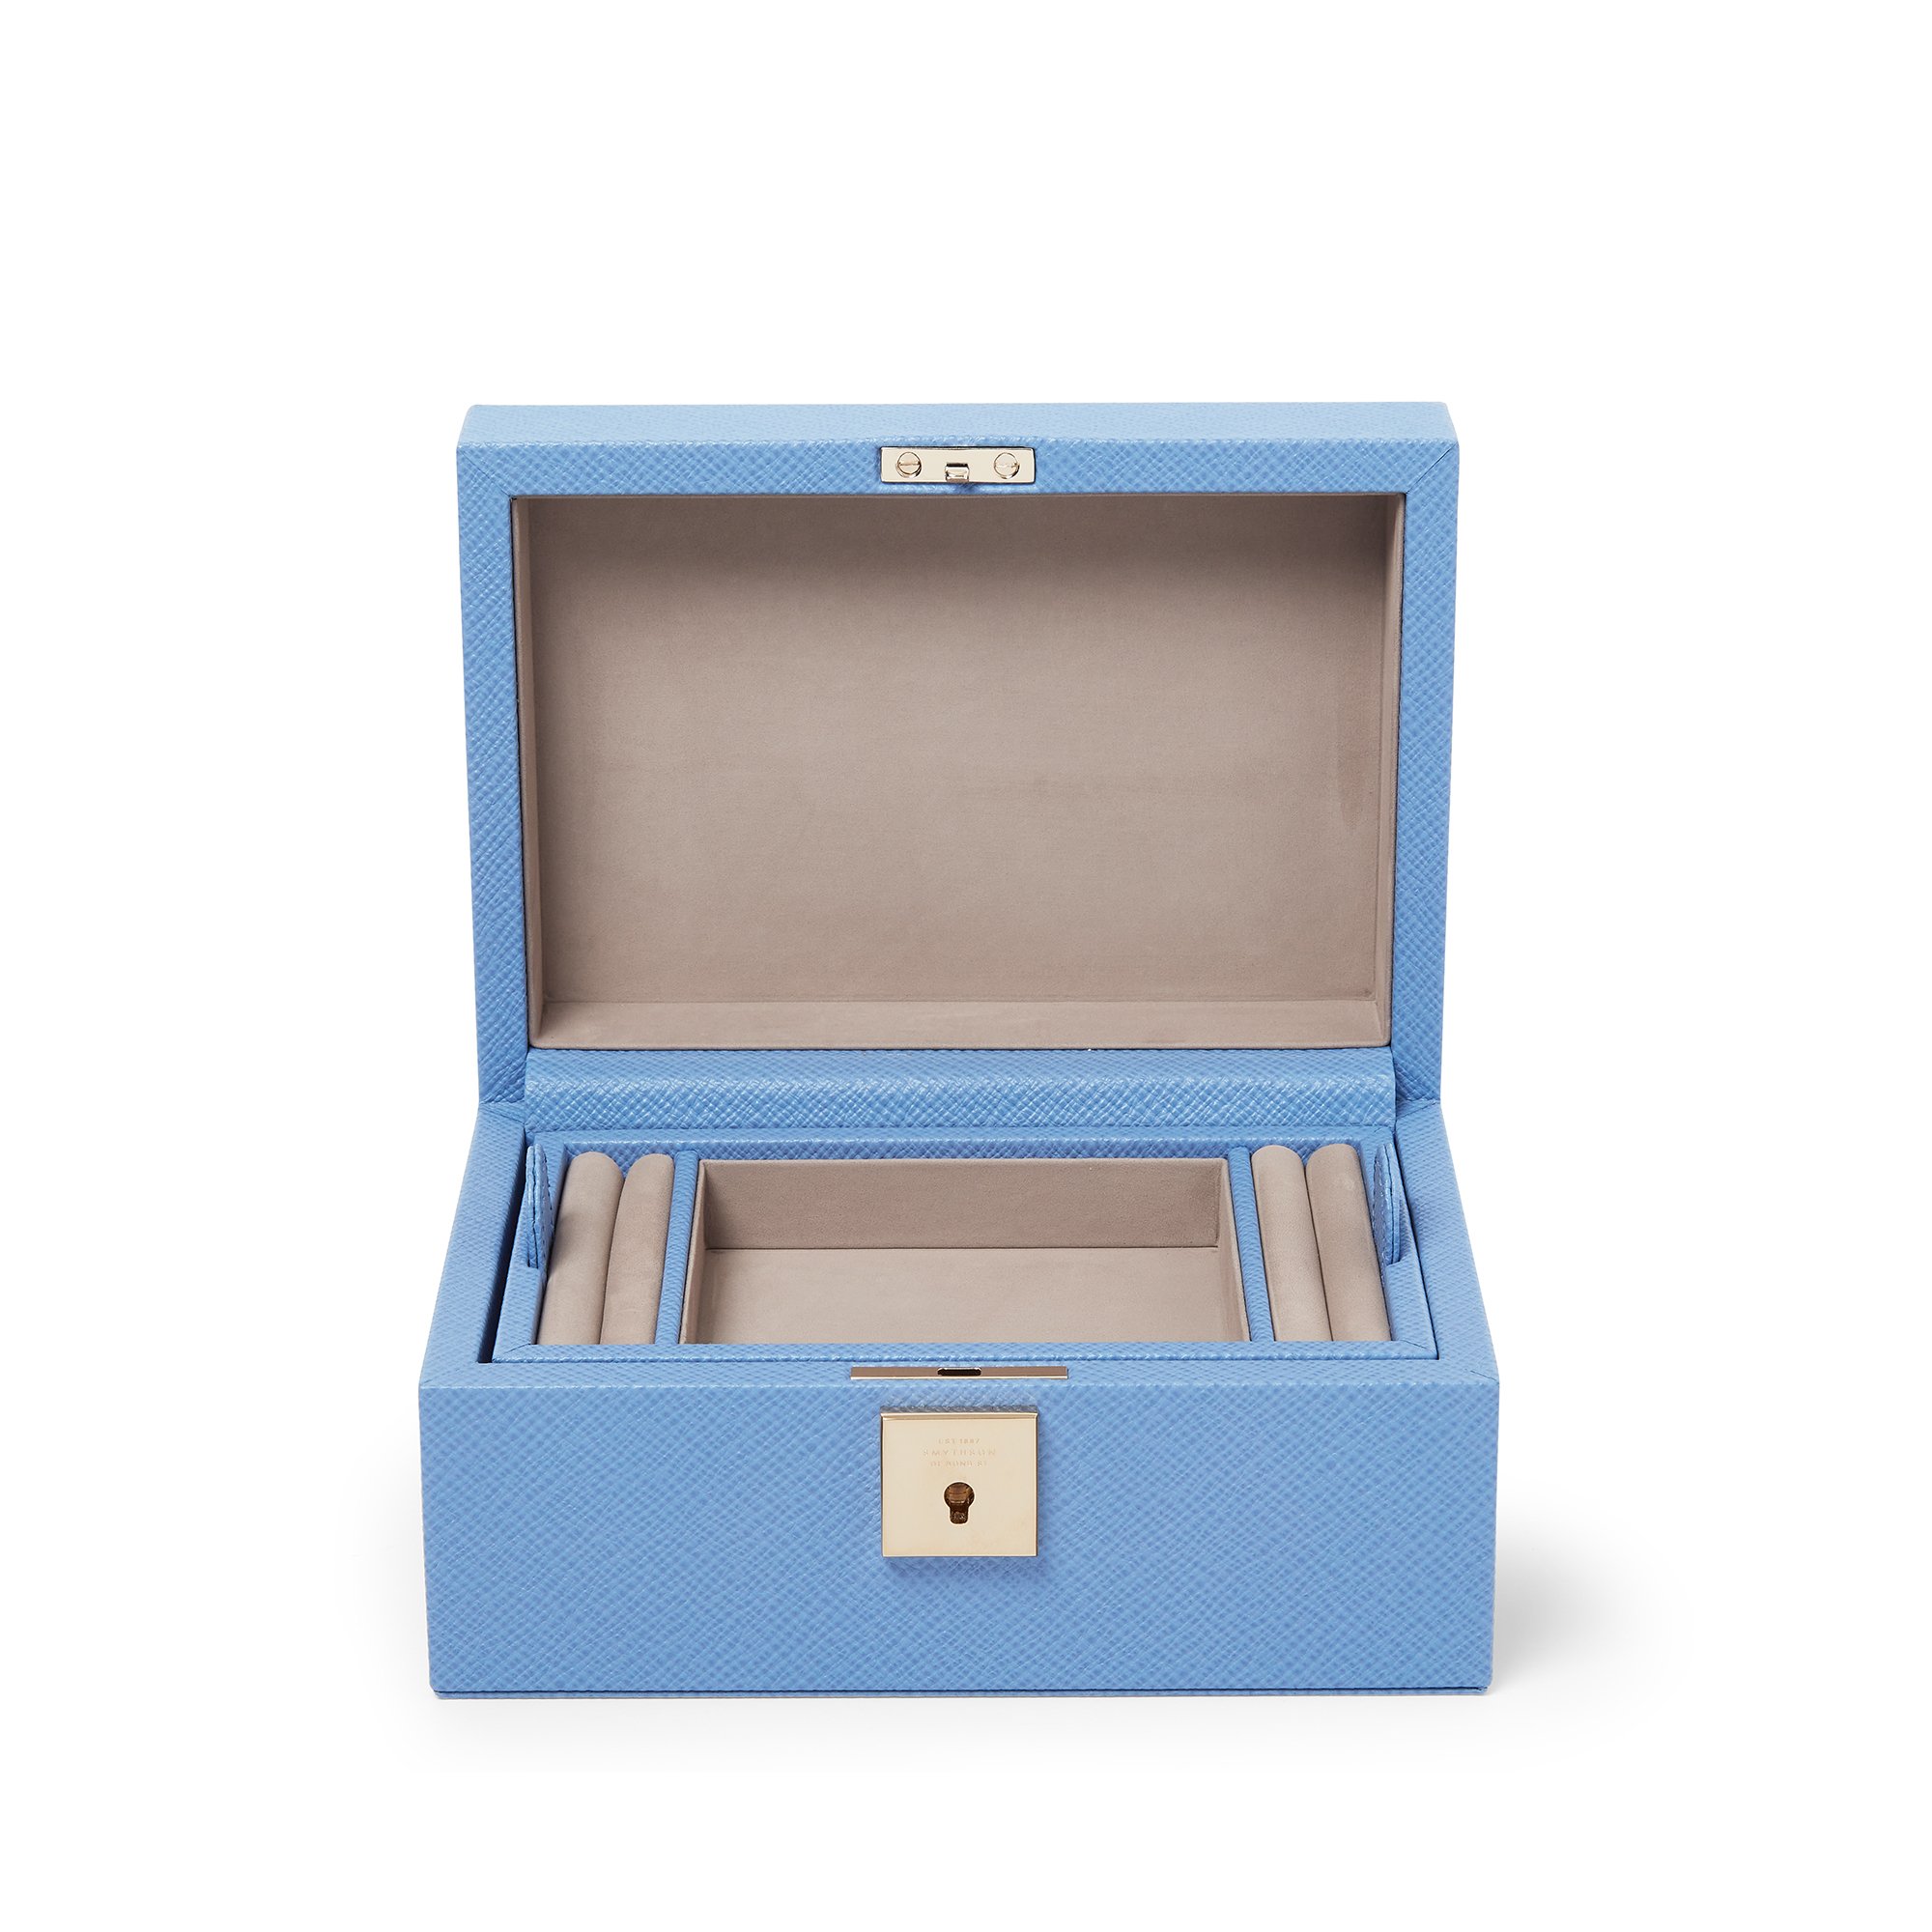 Smythson Small Jewellery Box With Tray In Panama In Nile Blue